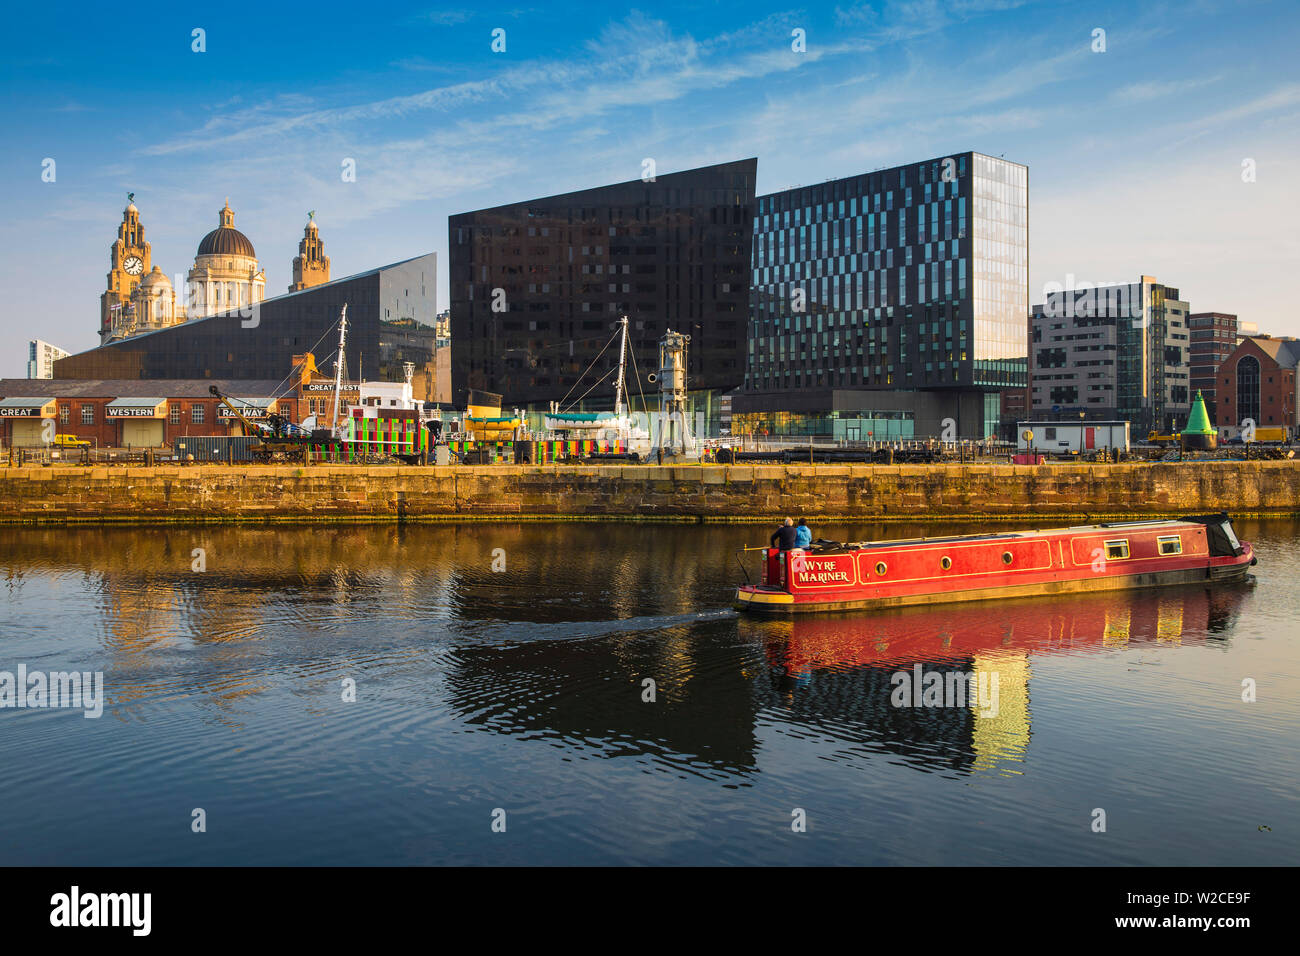 United Kingdom, England, Merseyside, Liverpool, View of Pier Head buildings reflecting in Canning Dock Stock Photo